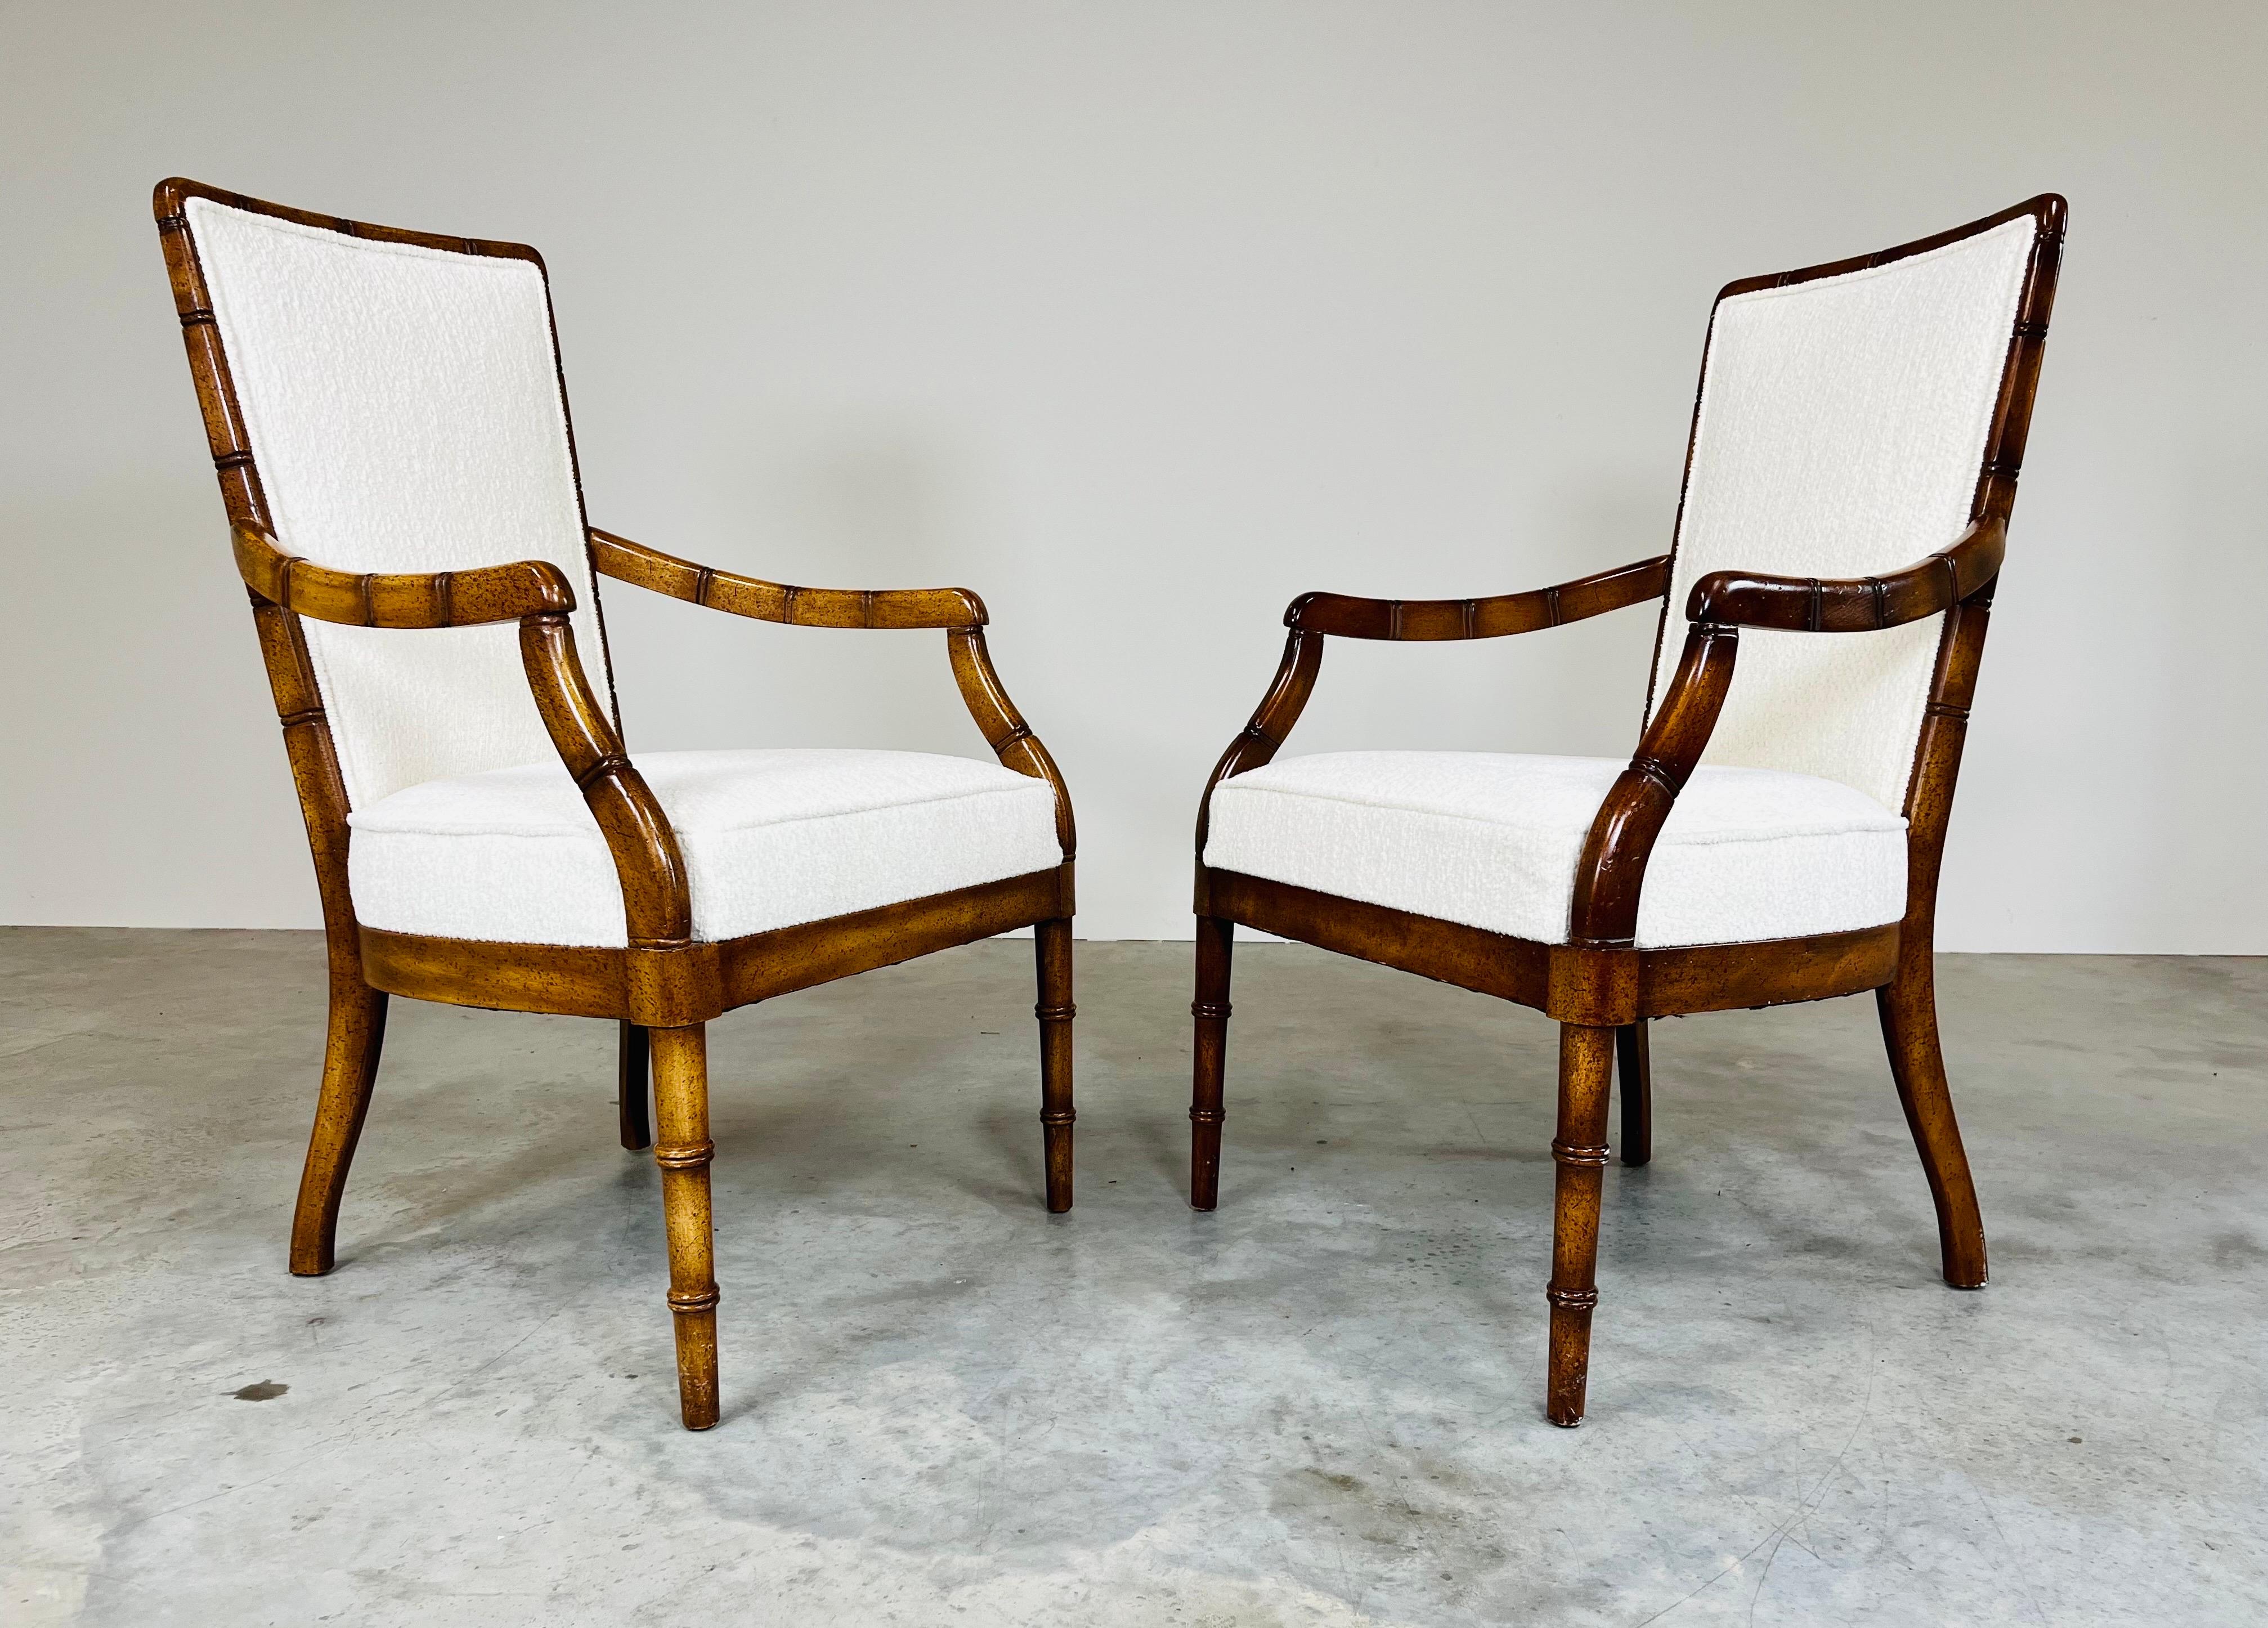 A stunning pair of carved wood faux bamboo Chippendale style armchairs having fresh upholstery and cushions with clean, spun solid wood frames. These chairs are stunning and will ad a regal accent to whatever space they’re placed in. Extremely